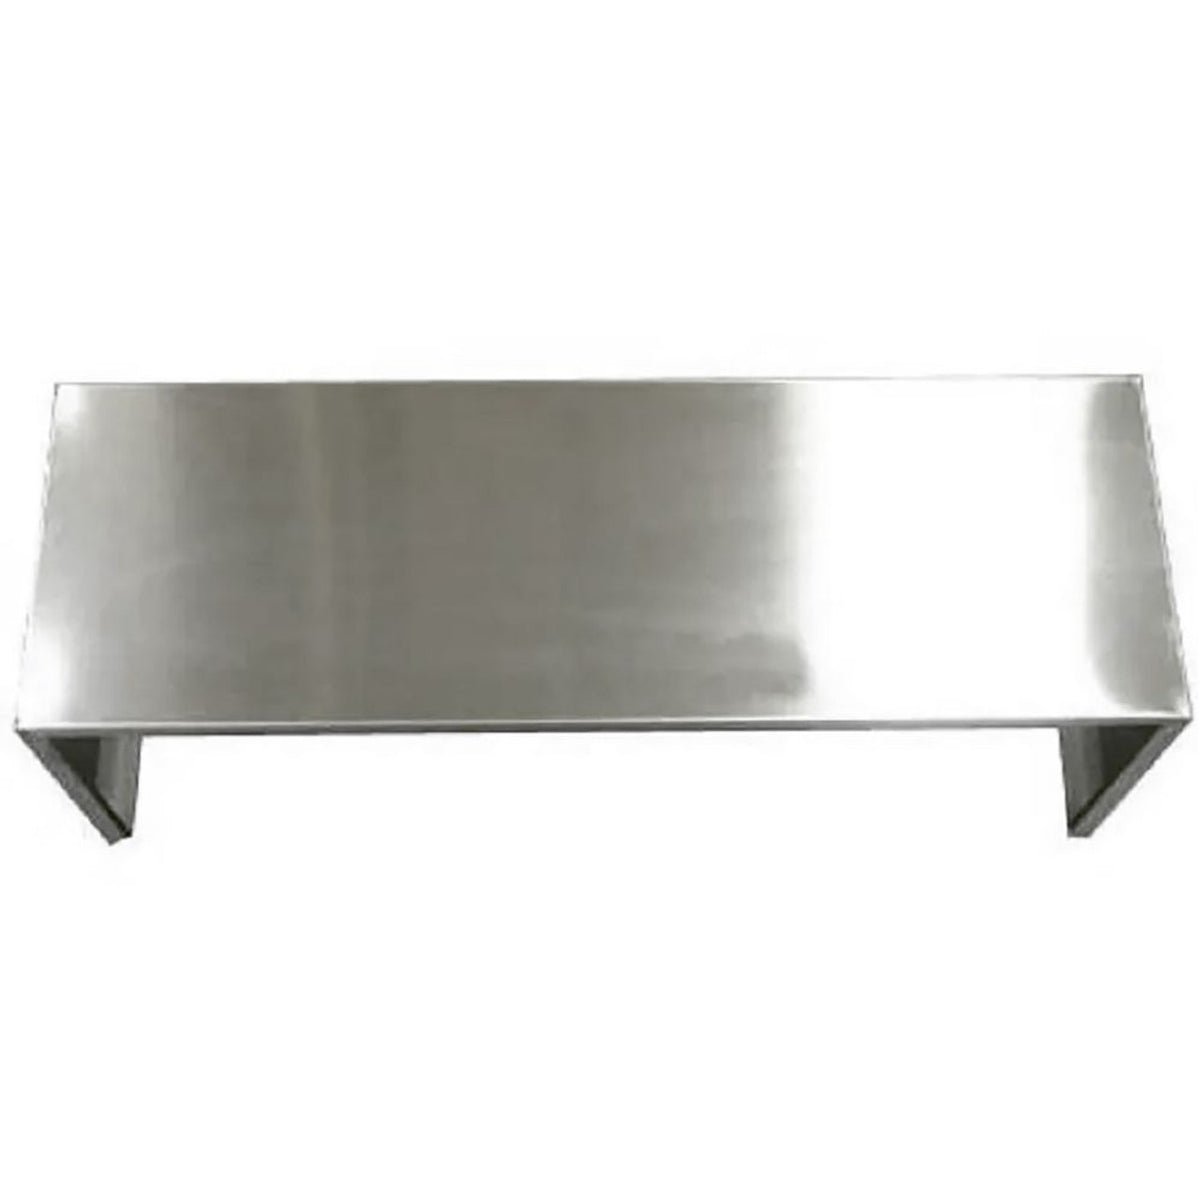 Bull 42x15x12 Inch Stainless Steel Dual Duct Cover